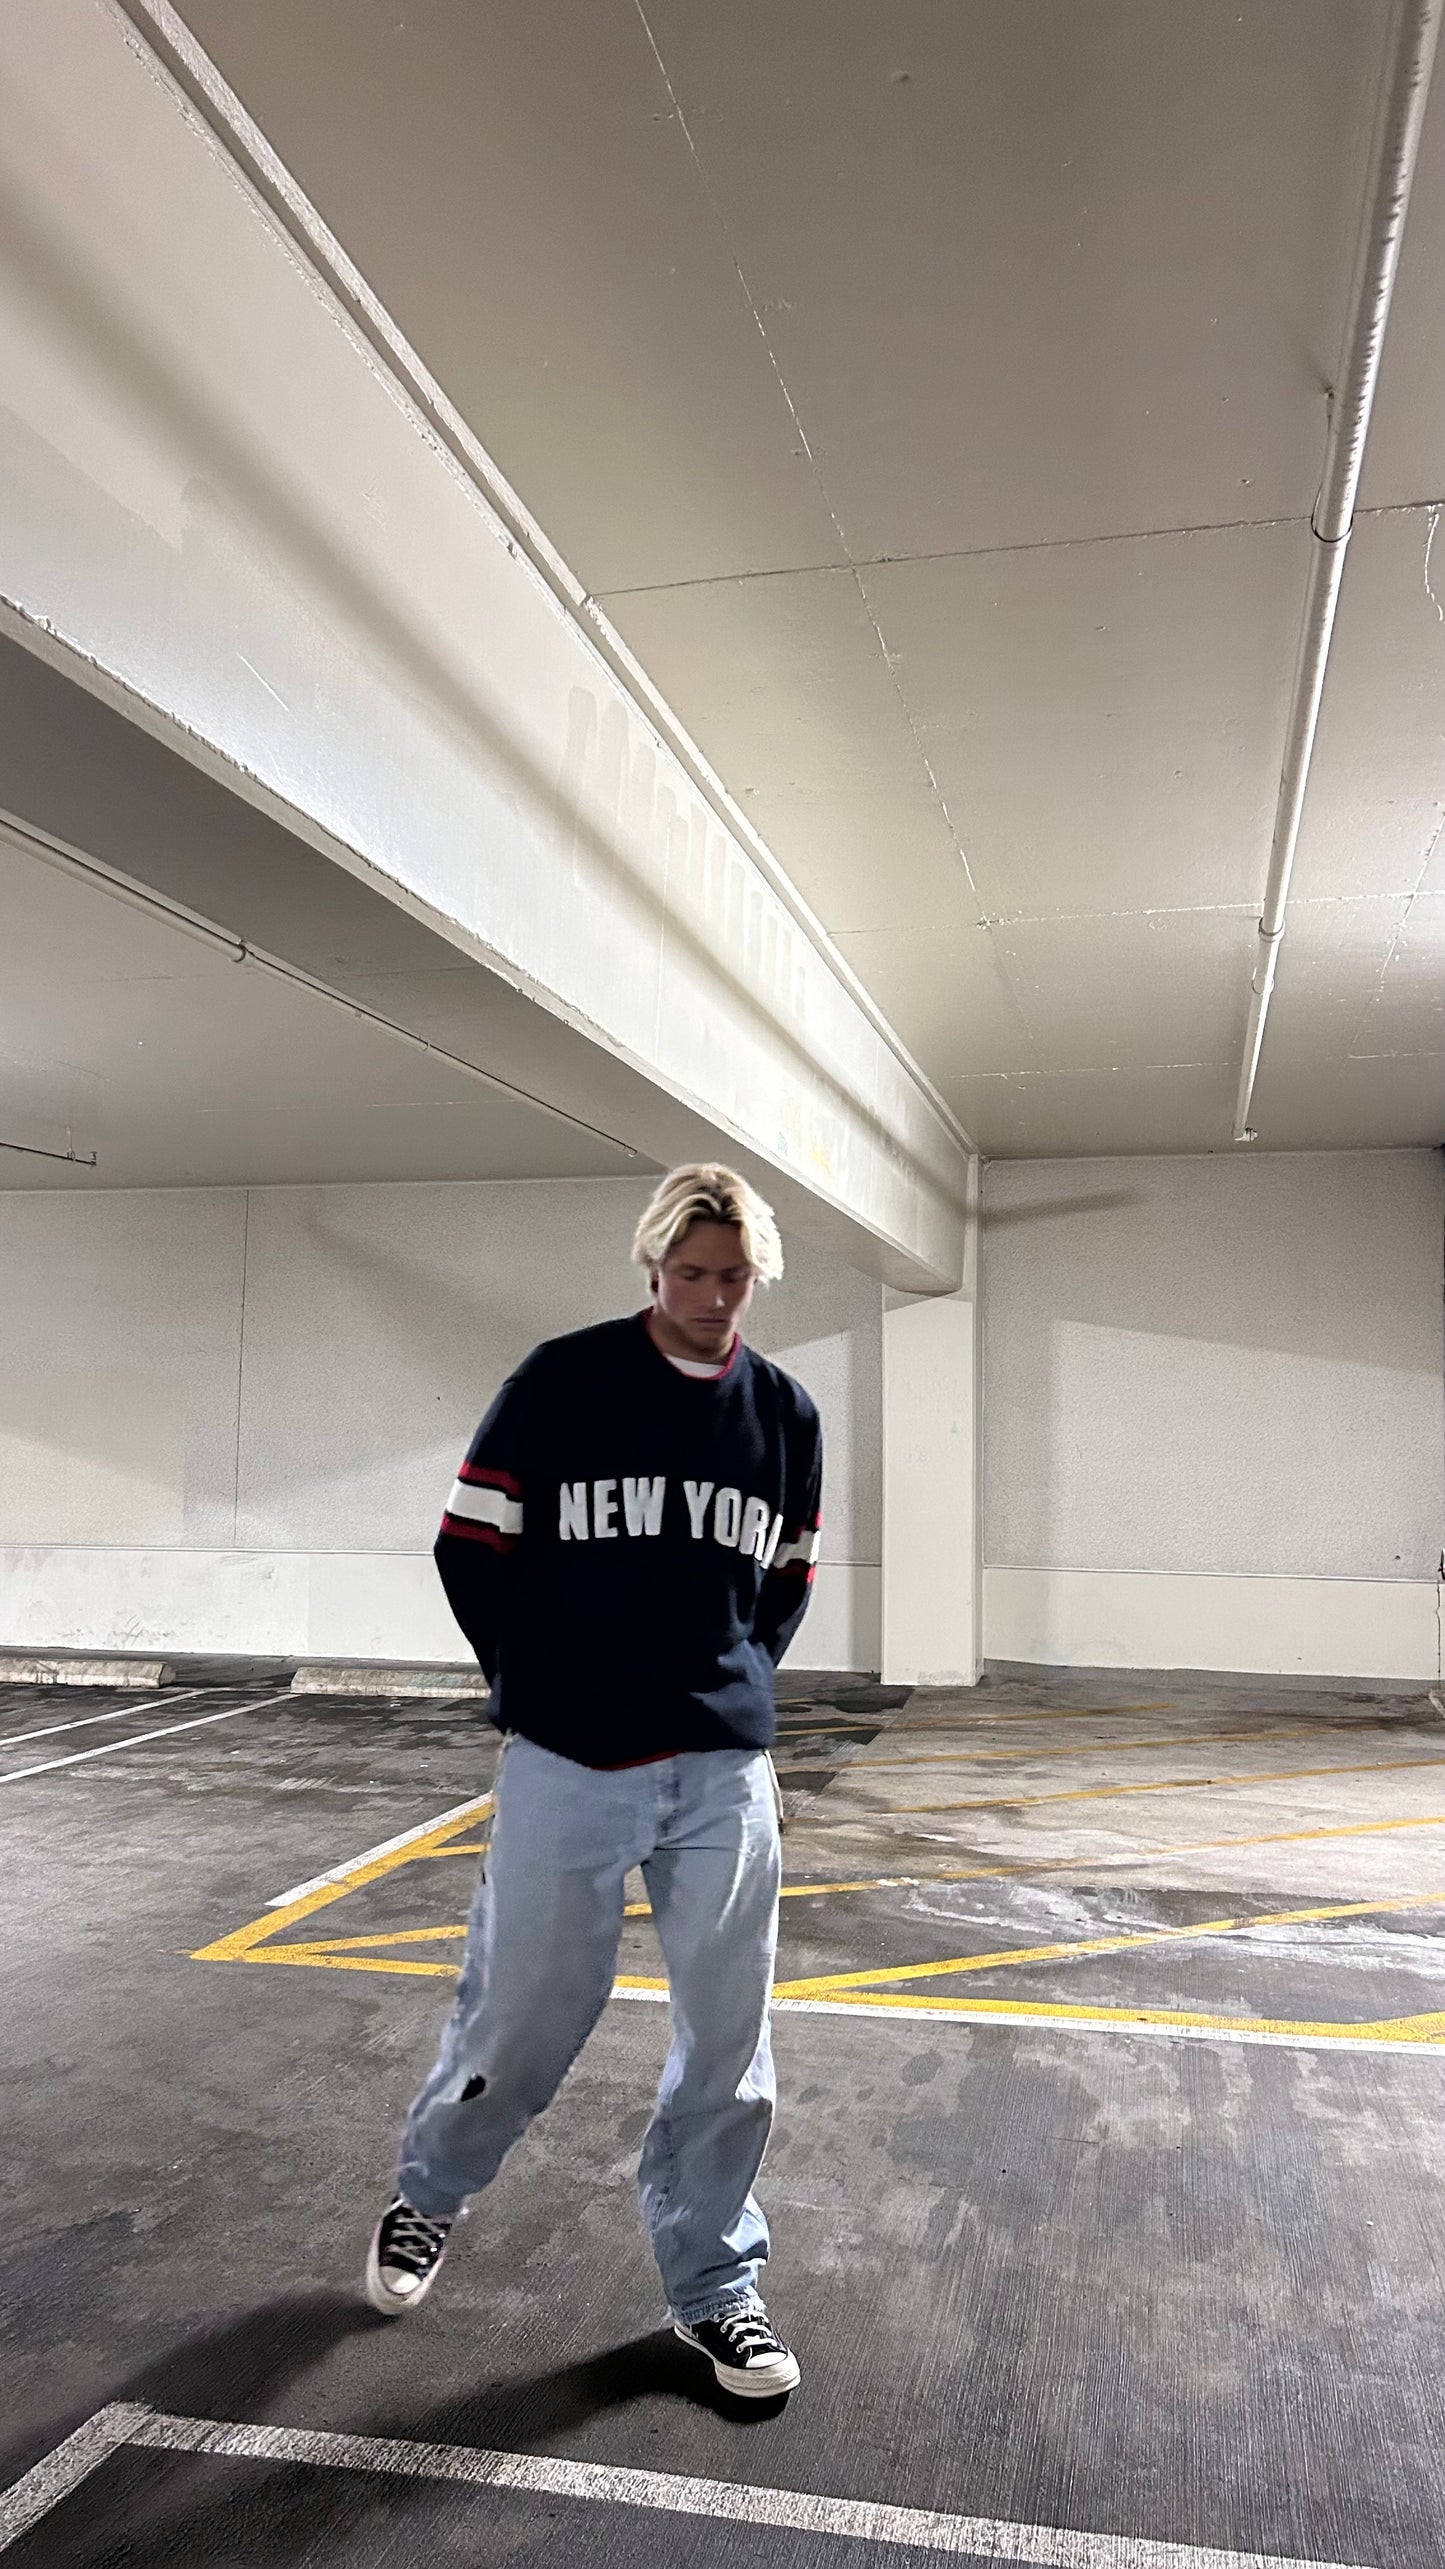 Vintage 90’s New York knit sweater